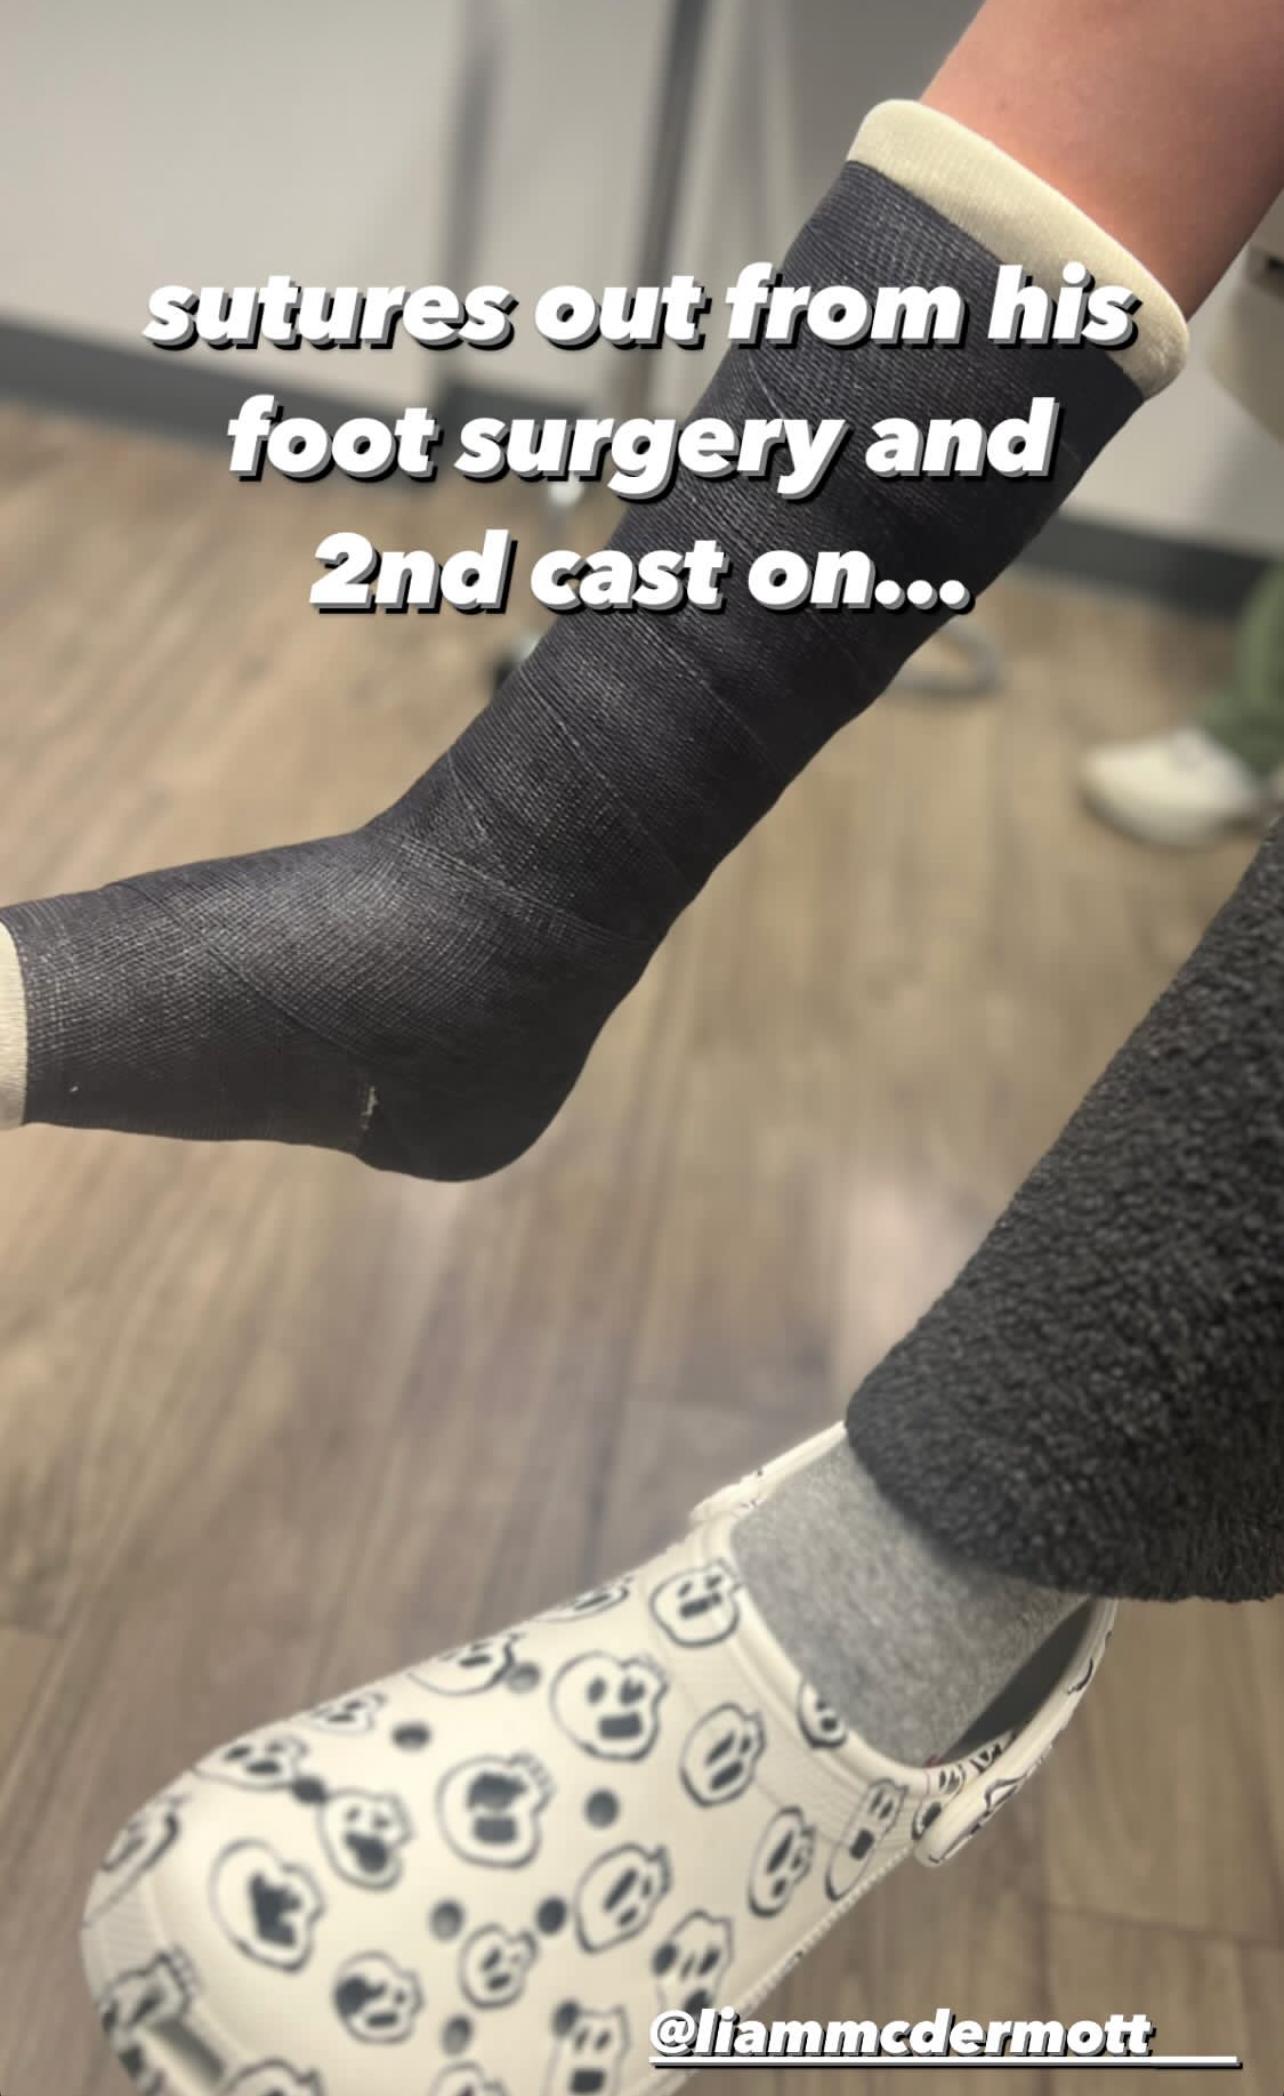 Tori Spelling Shares Update On Son Liam's Recovery After Foot Surgery